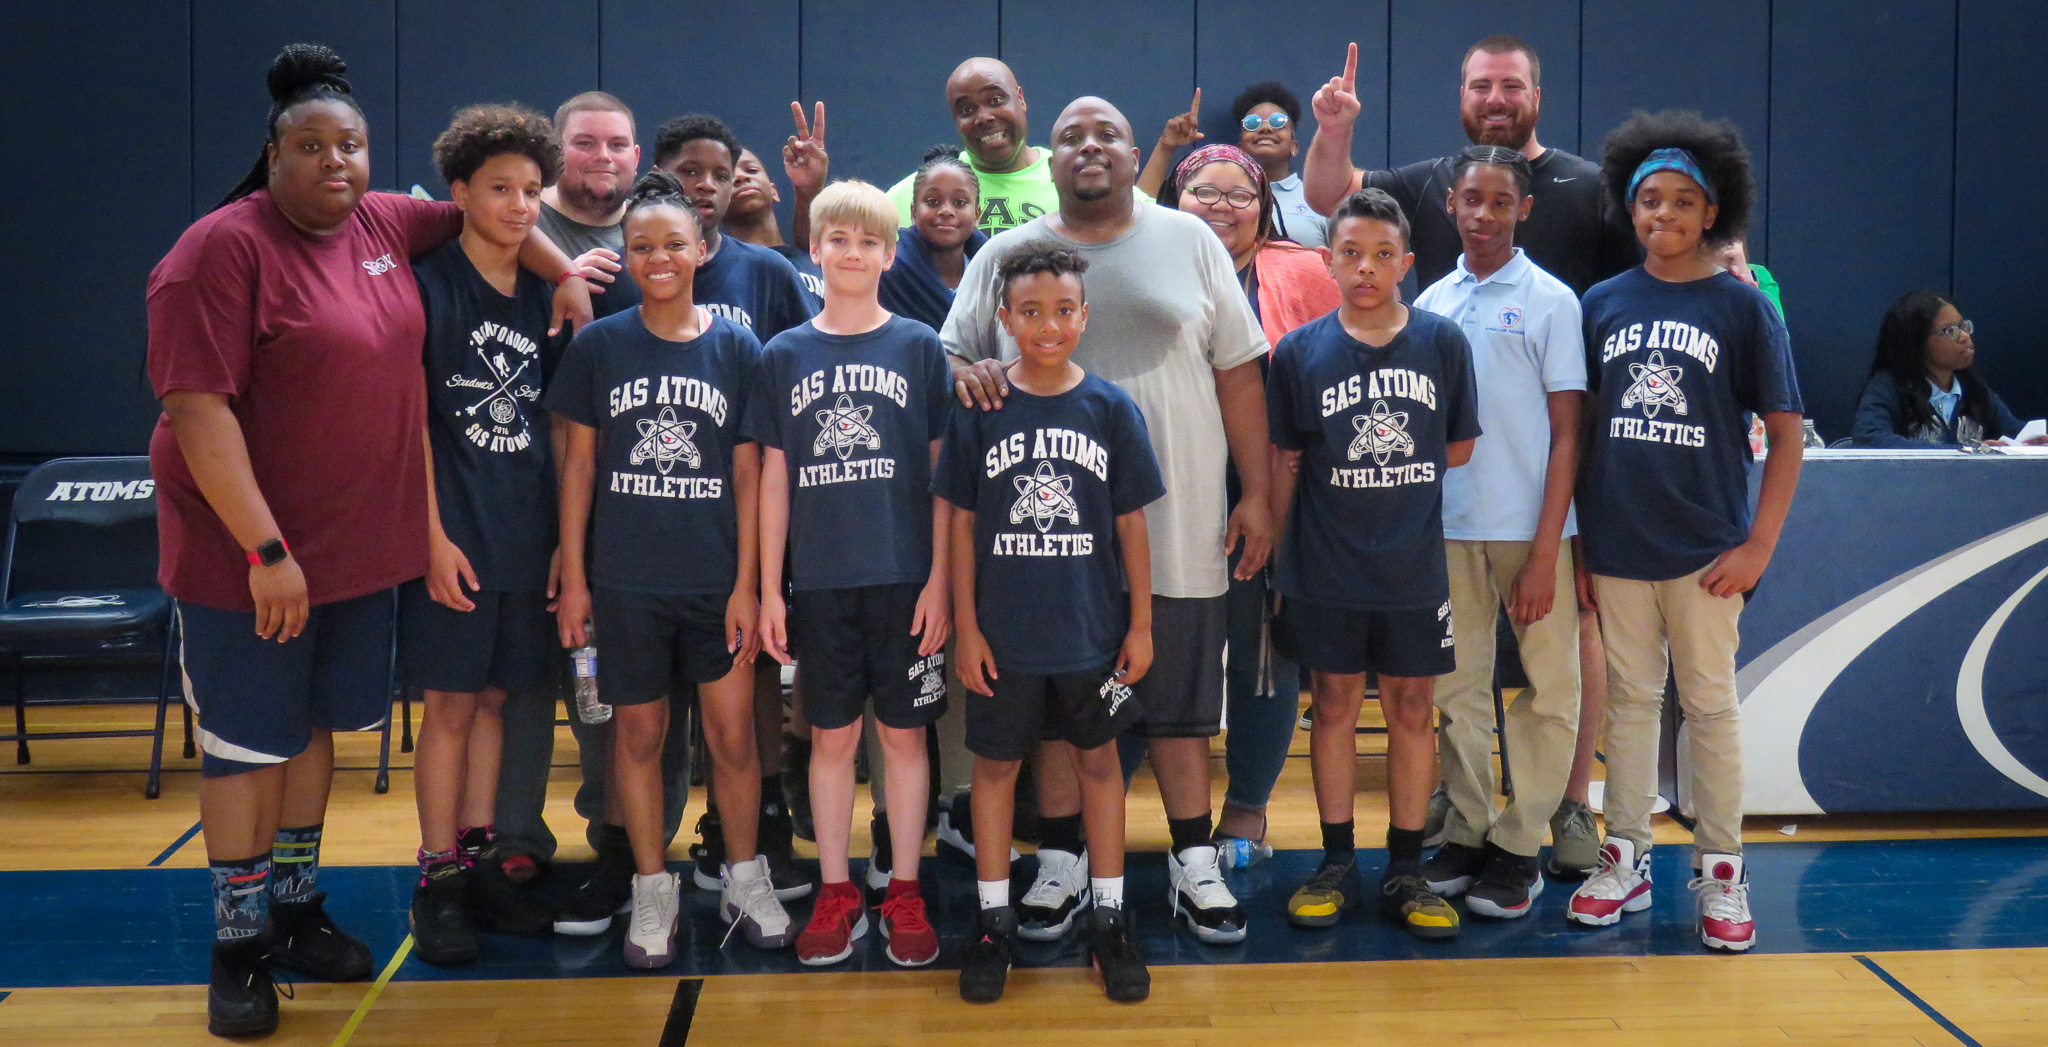 The annual Student vs. Staff basketball game is a favorite tradition at SASCS middle school